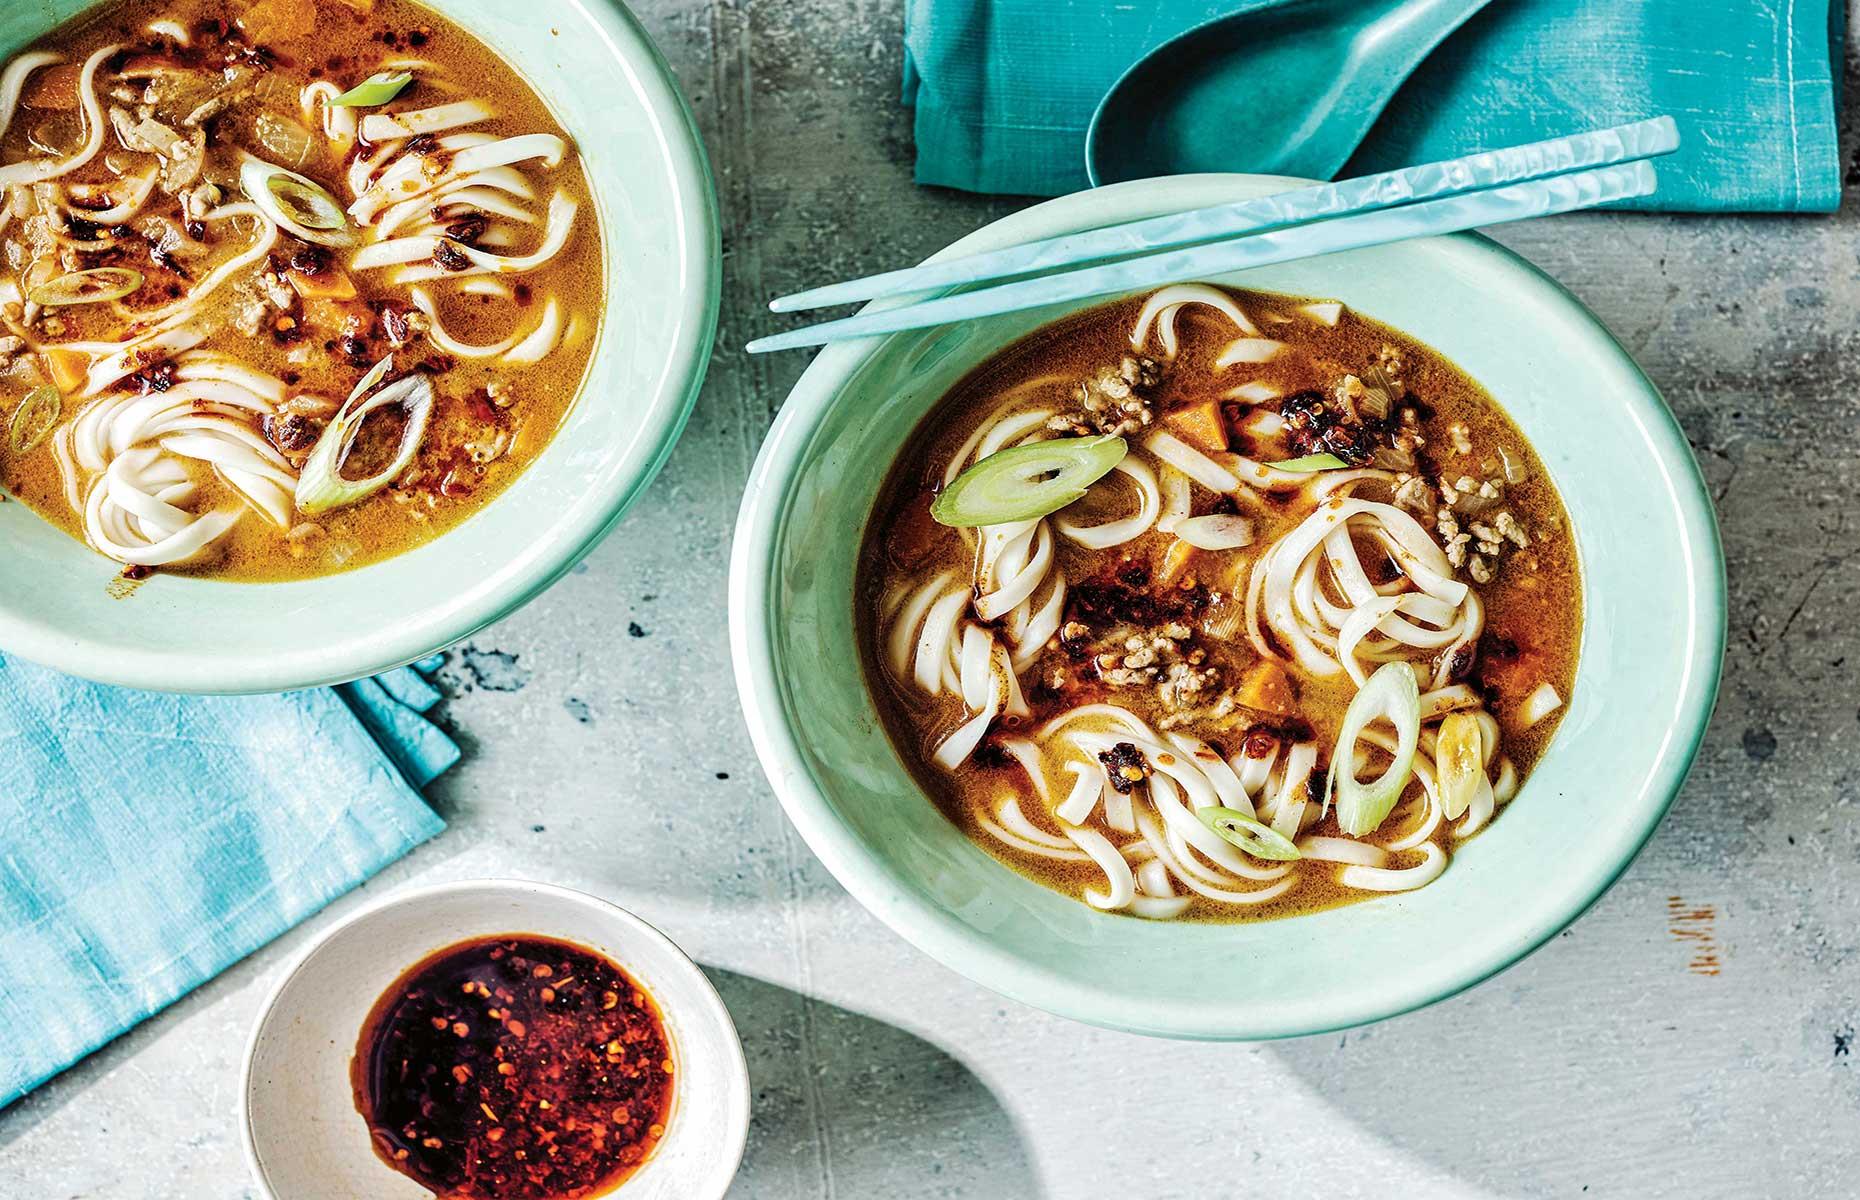 <p>Sichuan chili bean paste, crushed yellow bean sauce (or miso paste) and crunchy peanut butter are the star ingredients to making the broth in this noodle soup taste like it's been simmering for hours. In reality, it's ready in around five minutes and the whole dish is on the table in 15 minutes.</p>  <p><strong><a href="https://www.lovefood.com/recipes/108848/dan-dan-noodle-soup-recipe">Get the recipe for dan dan noodle soup here</a></strong></p>